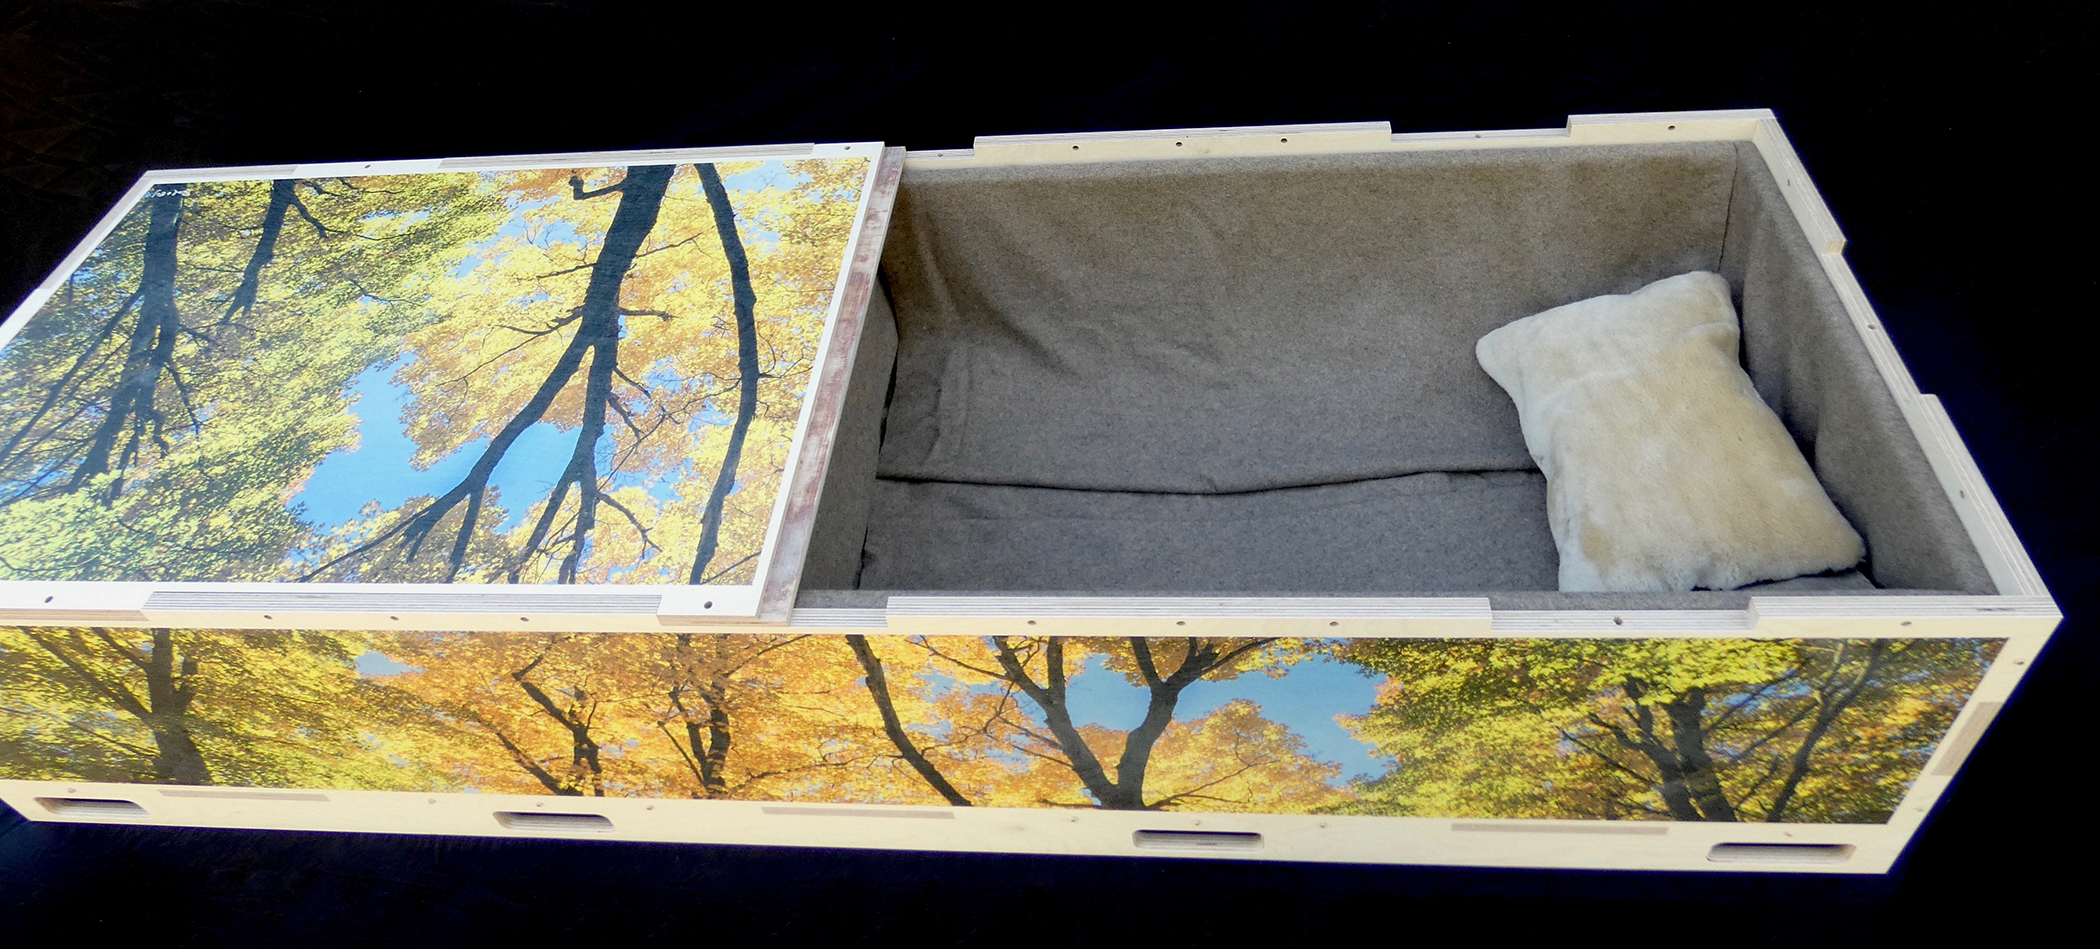 Vermont Custom Cabinet (Barre, VT) won first-place prize in the  Annual PureBond® Quality Awards competition with its innovative line of custom caskets.